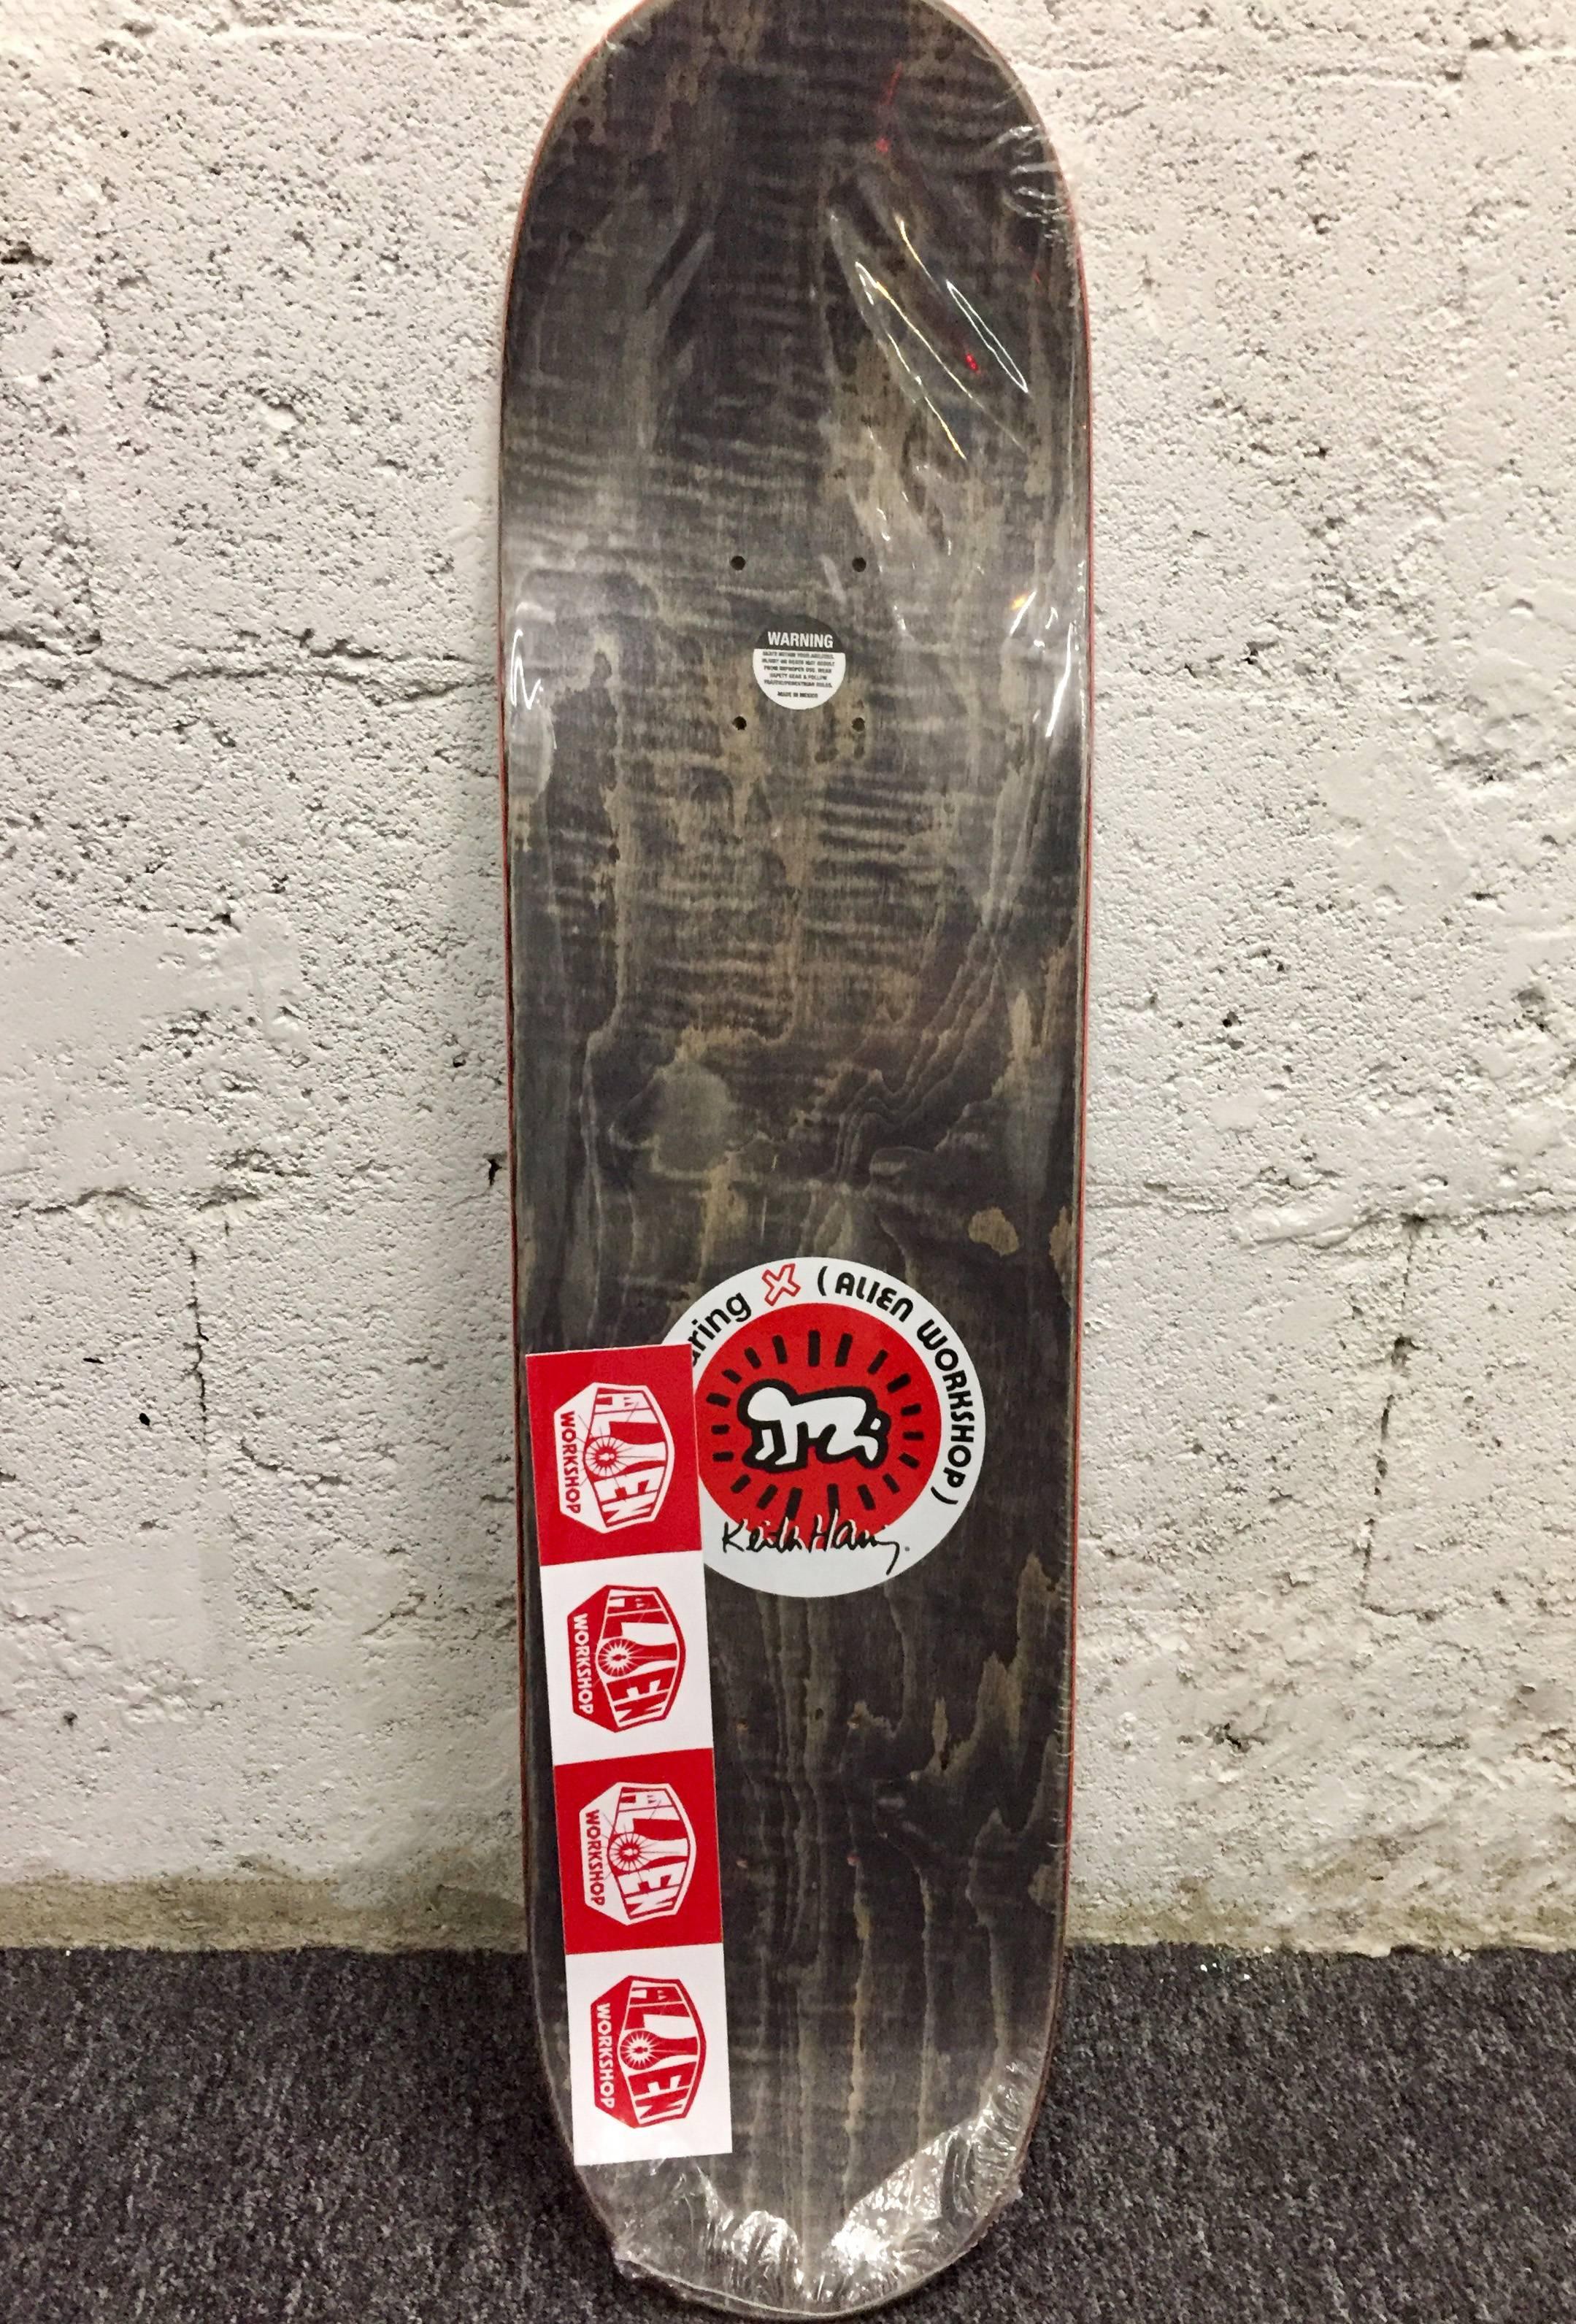 Rare Out of Print Keith Haring Skate Deck featuring an off set of illustration the artist's iconic Boom Box men.

This work originated circa 2012 as a result of the collaboration between Alien Workshop and the Keith Haring Foundation. The deck is